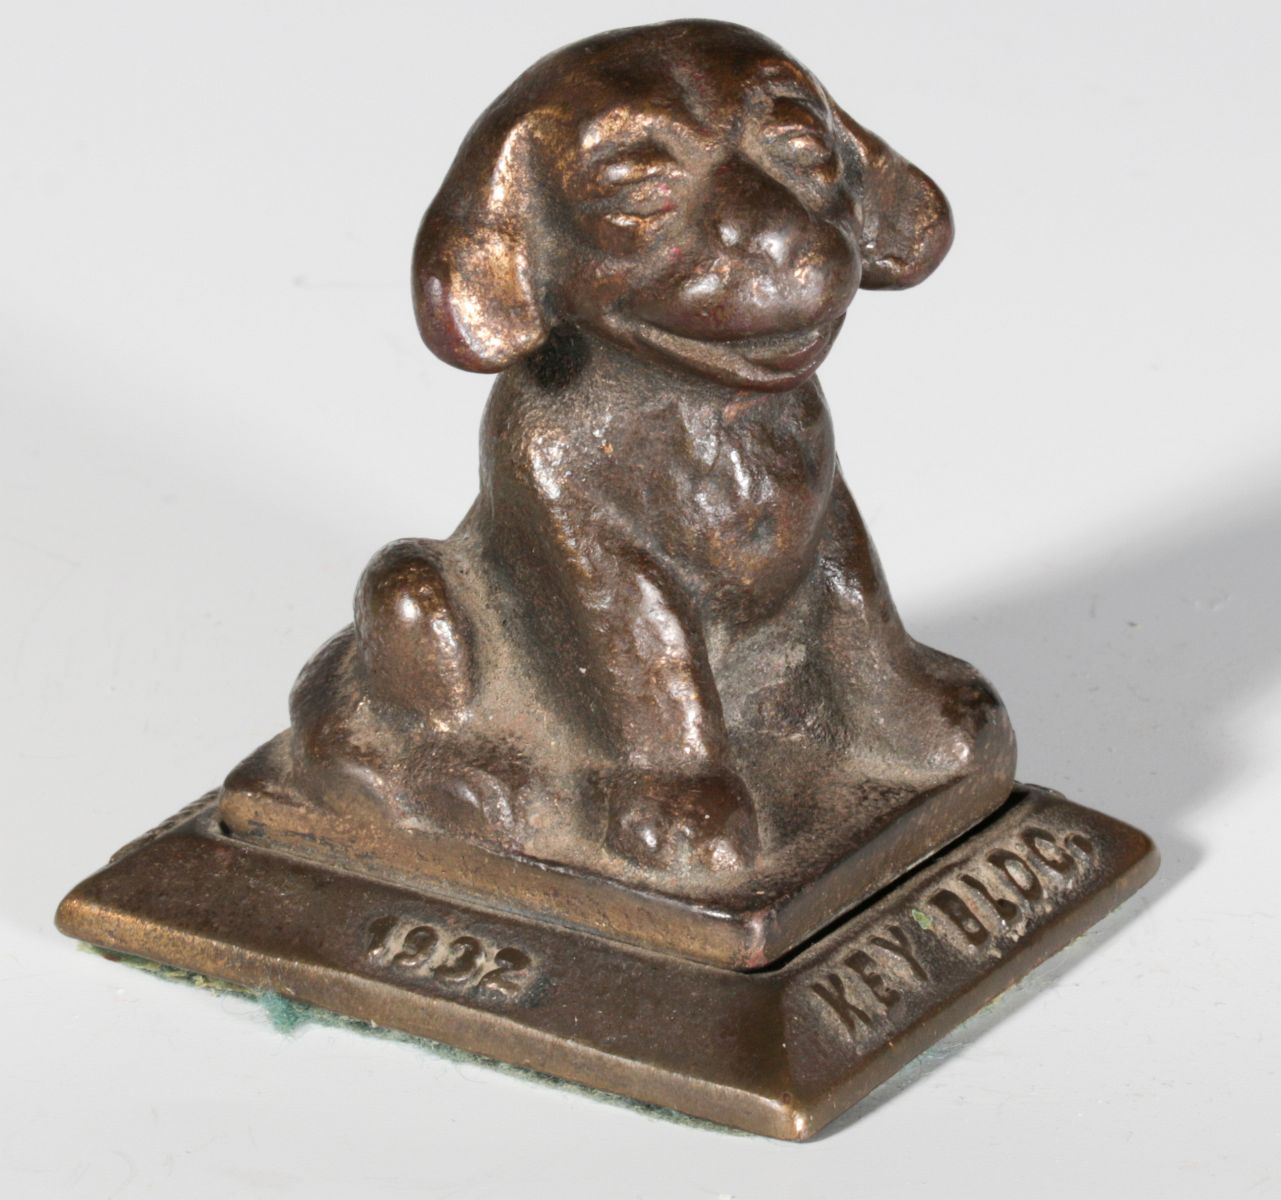 A 1932 FIGURAL DOG ADVERTISING PAPERWEIGHT